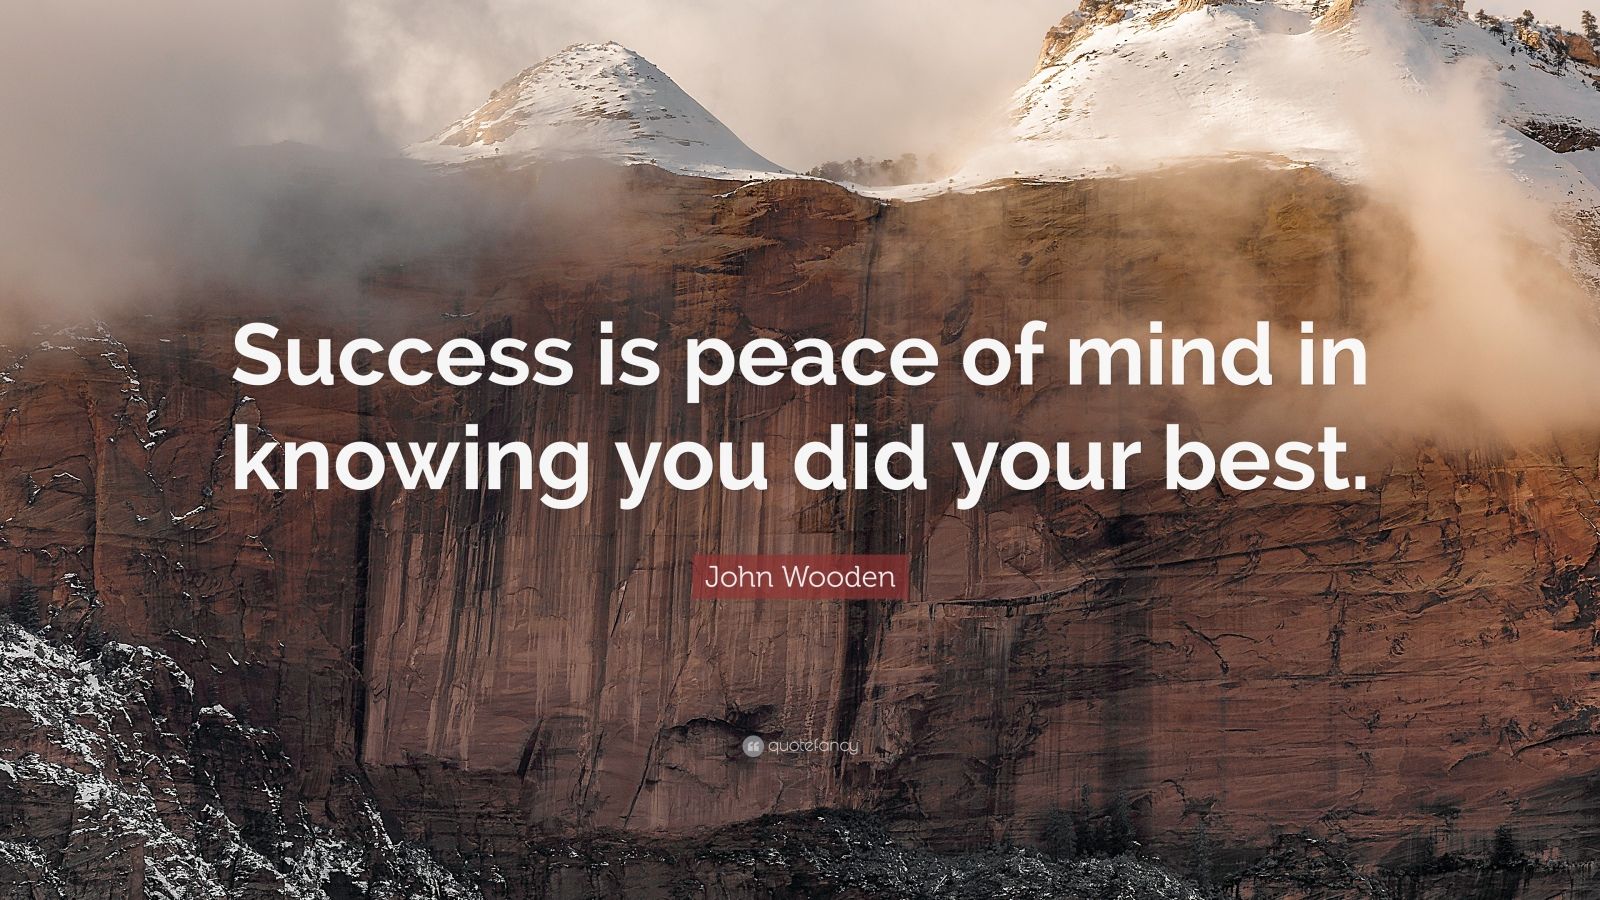 John Wooden Quote: "Success is peace of mind in knowing you did your best." (22 wallpapers ...